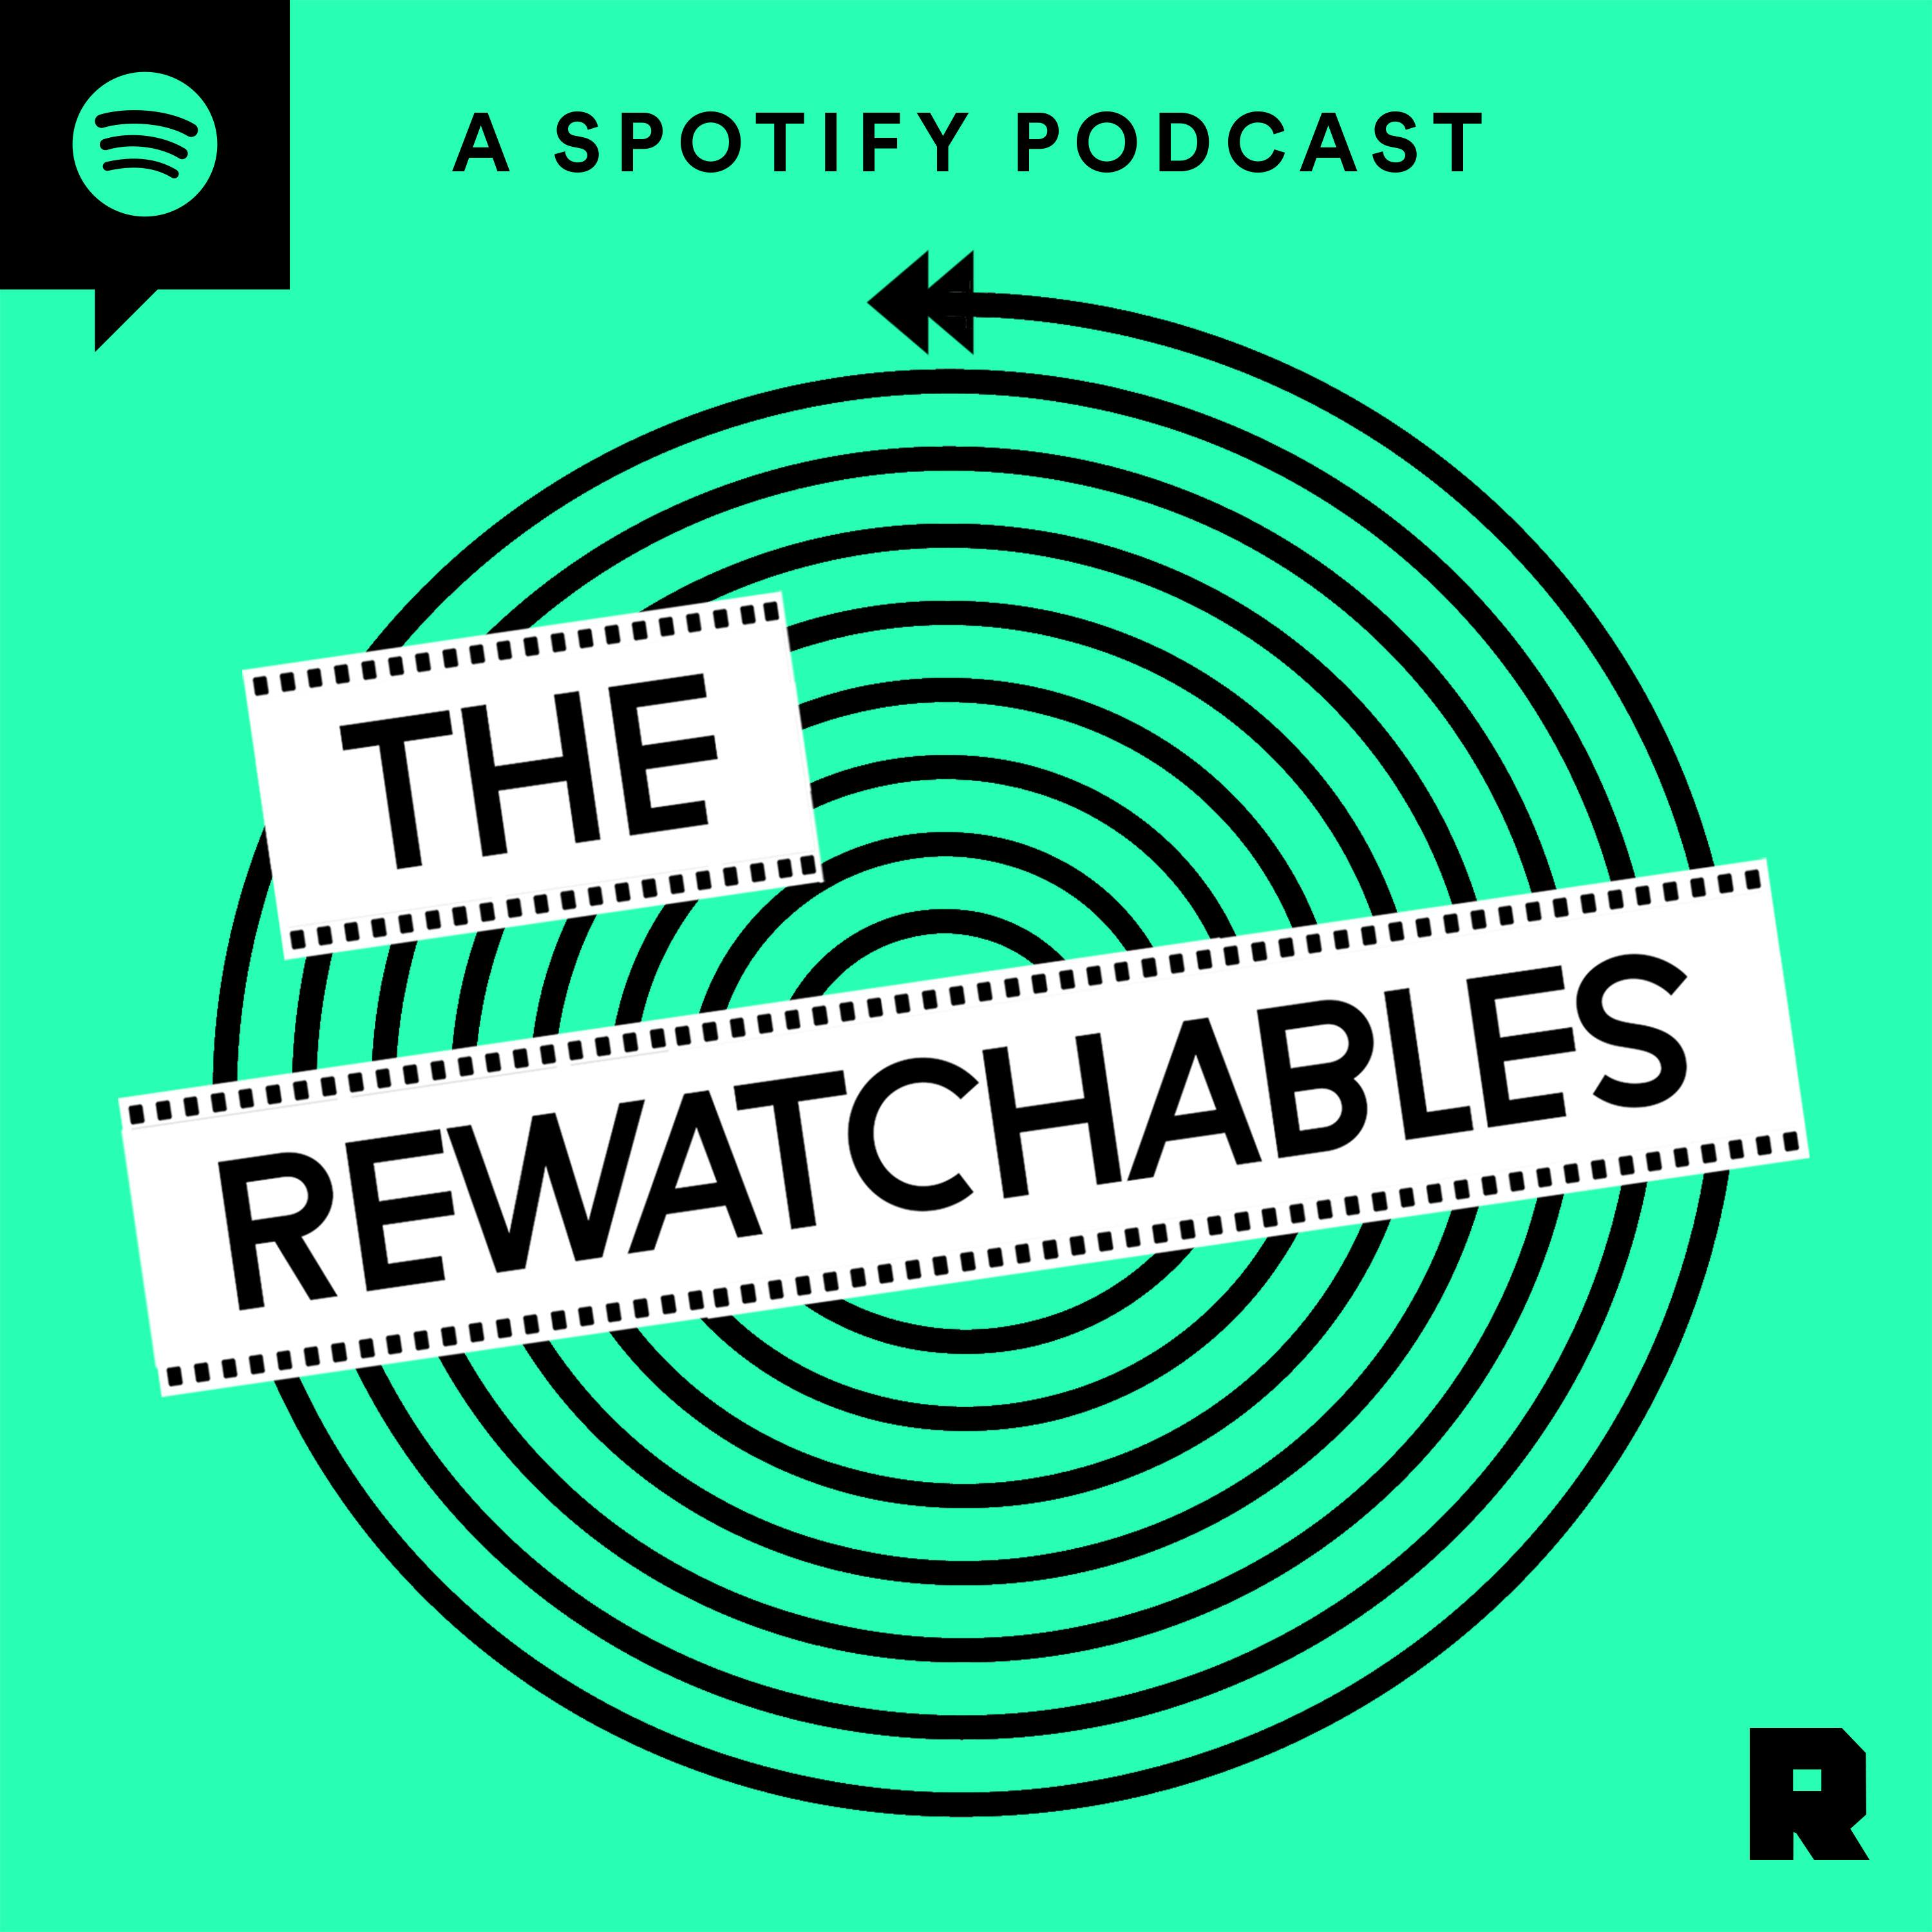 The Rewatchables podcast show image